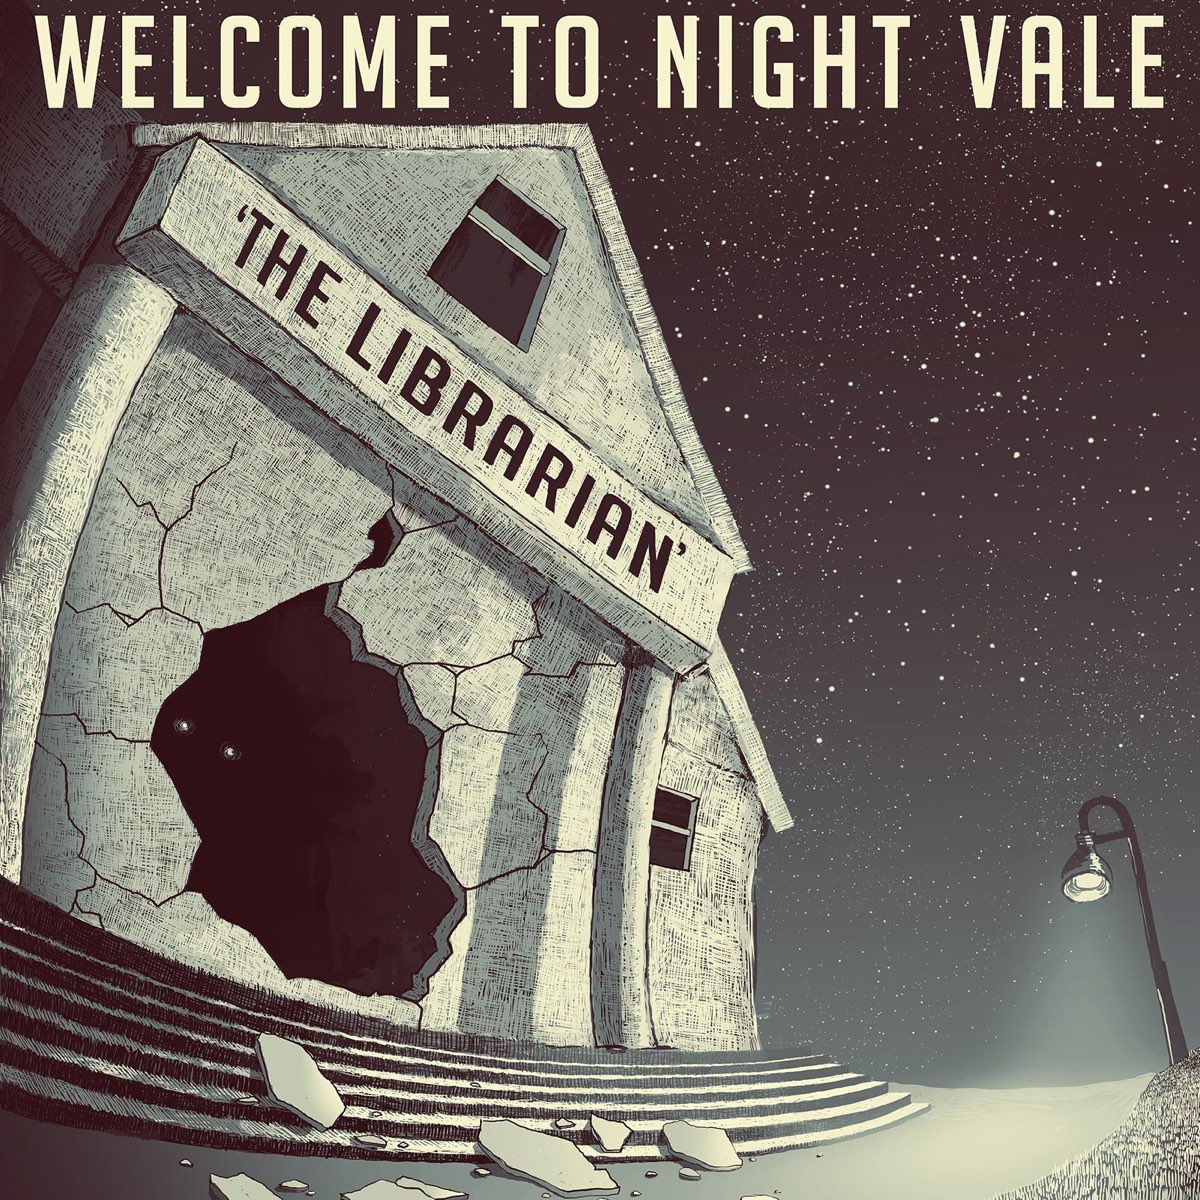 Welcome to Night Vale. Night Vale Podcast. Ангелы Welcome to Nightvale. Welcome to Night Vale мемы.